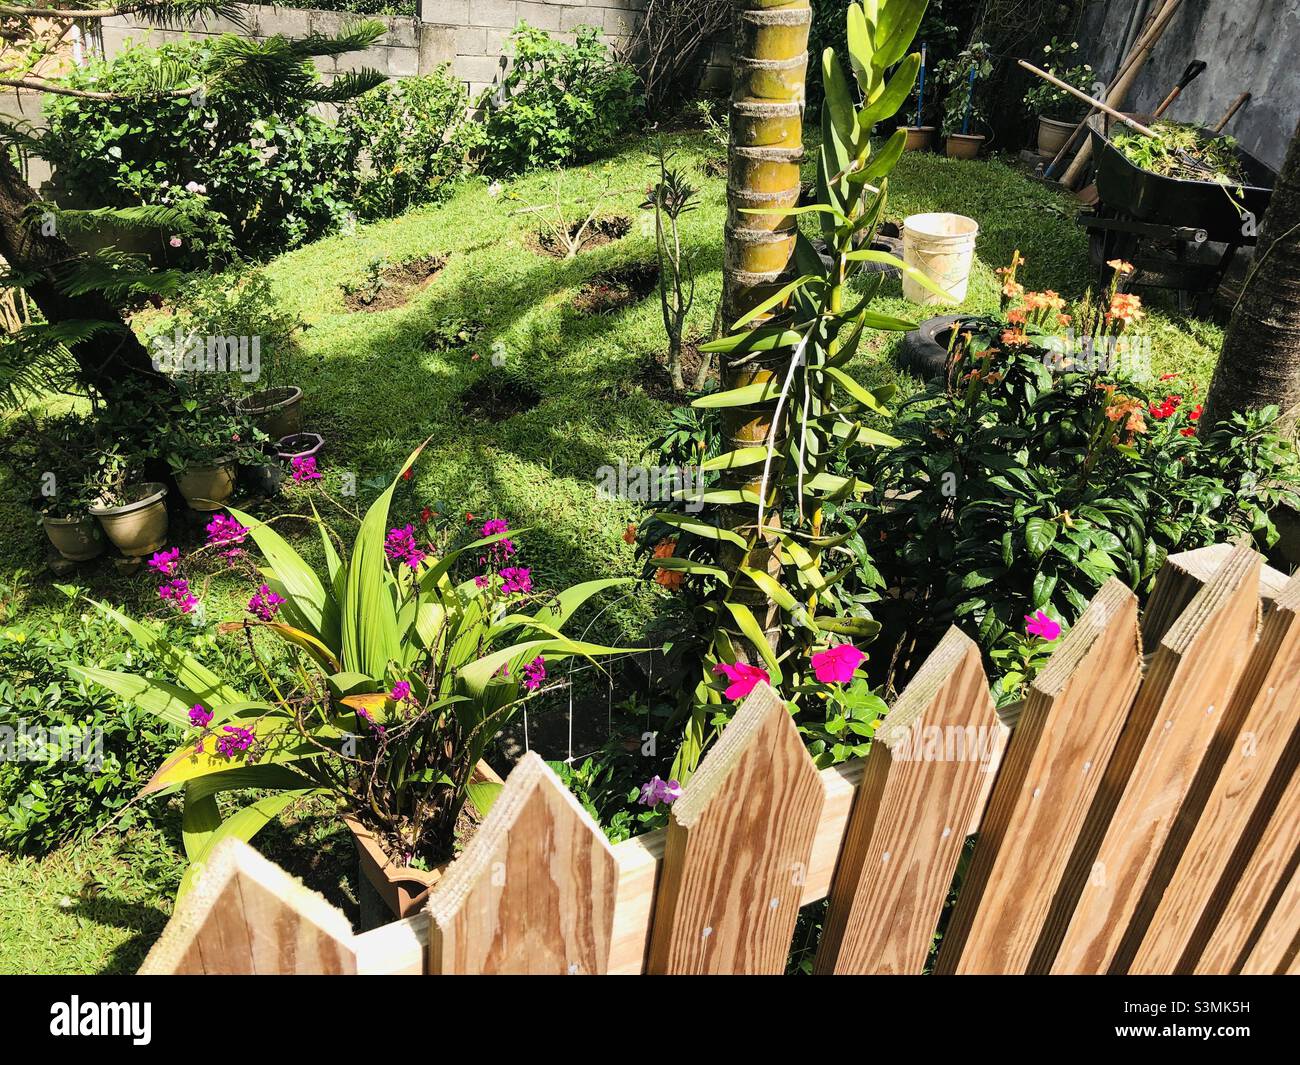 Tropical garden with picket fence Stock Photo